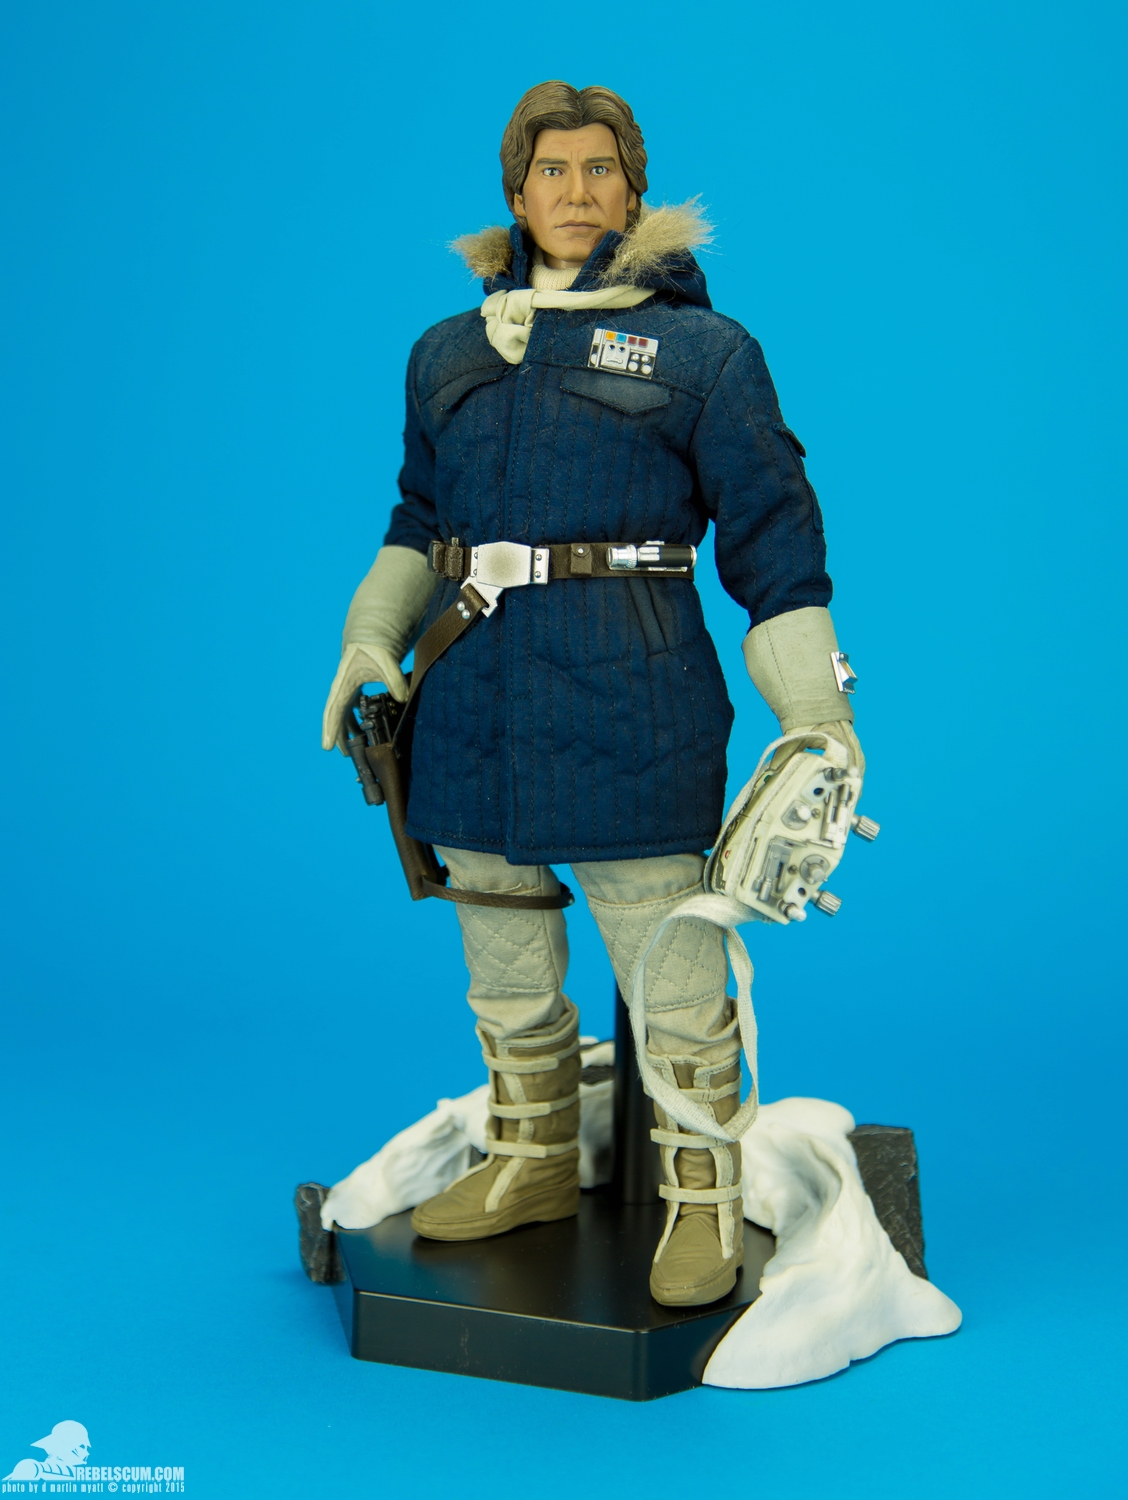 Han-Solo-Hoth-Blue-Sixth-Scale-Sideshow-Collectibles-Star-Wars-020.jpg